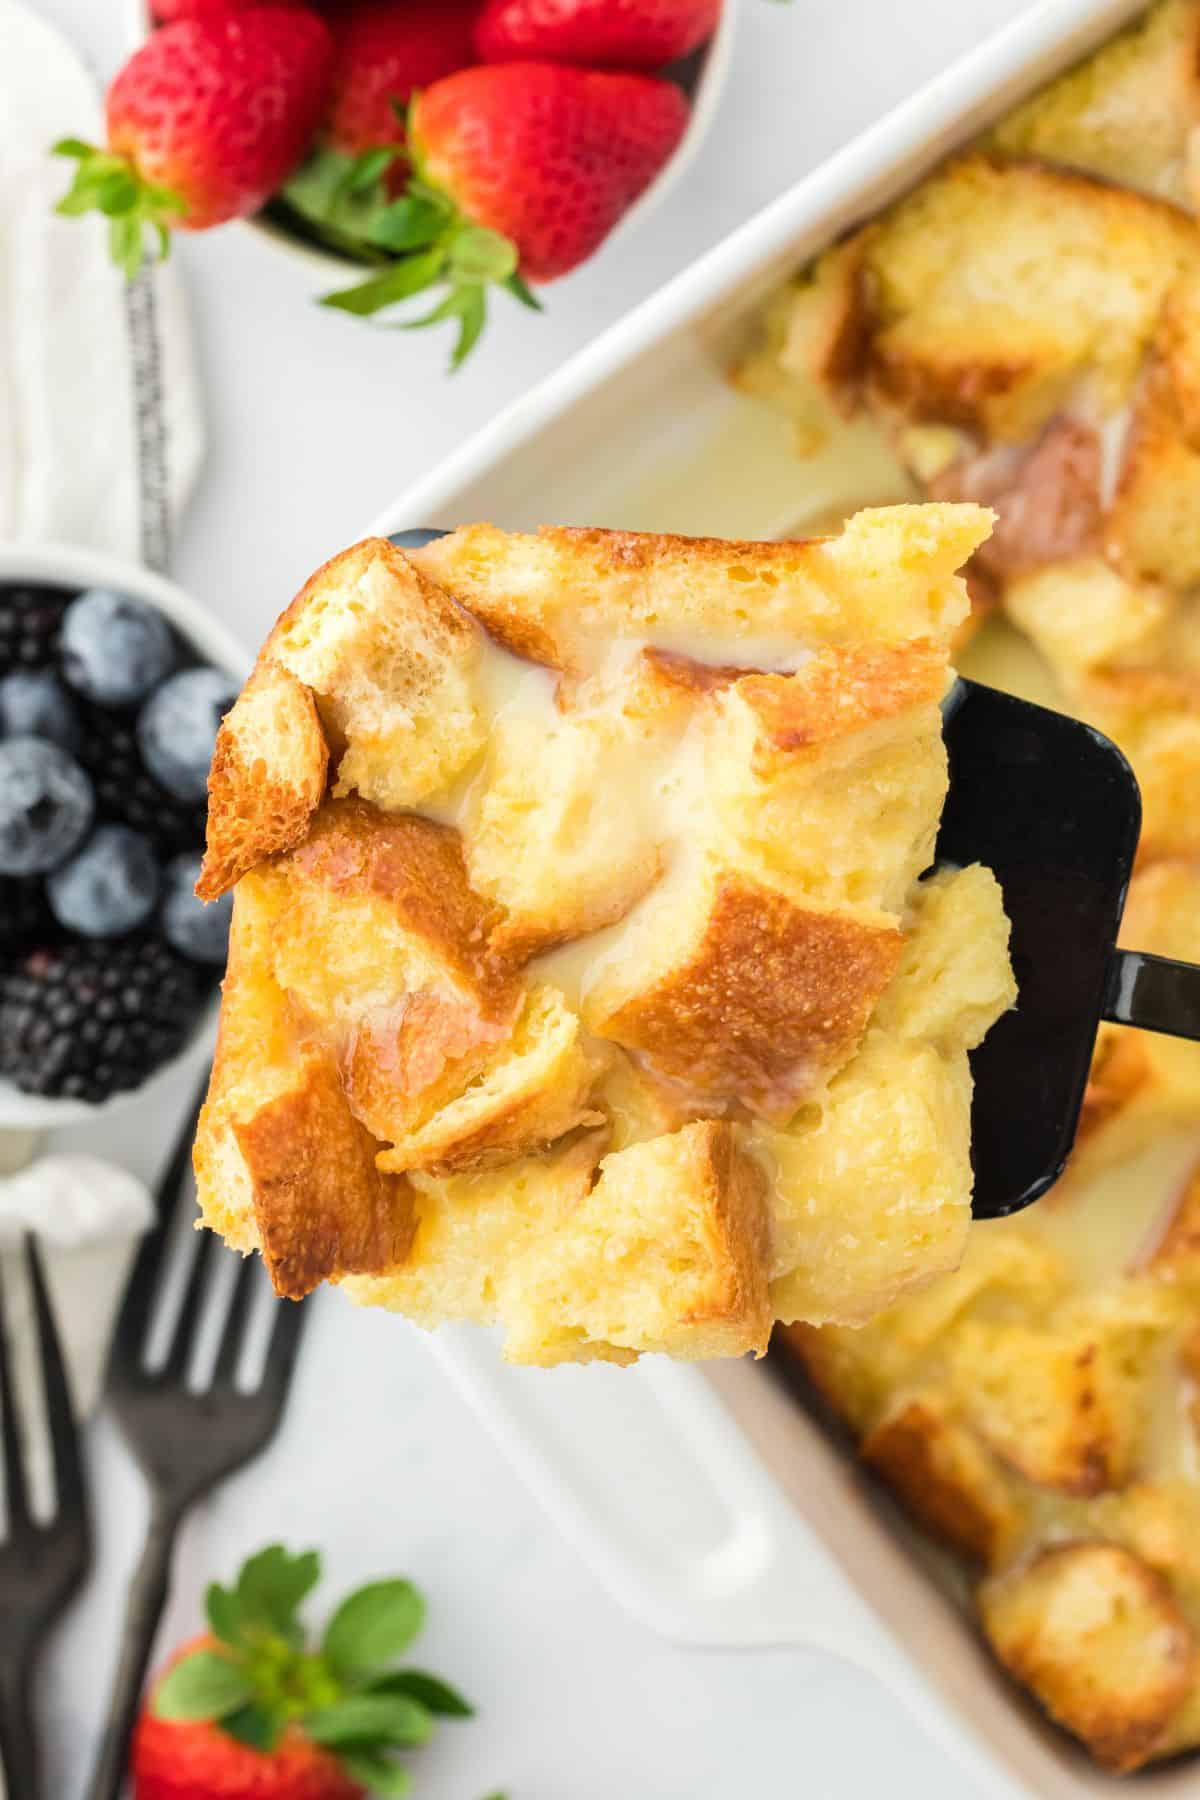 Closeup of a serving spoon lifting a generous piece of white chocolate bread pudding out of a white baking dish. In the background, there is a bowl of mixed berries and black forks